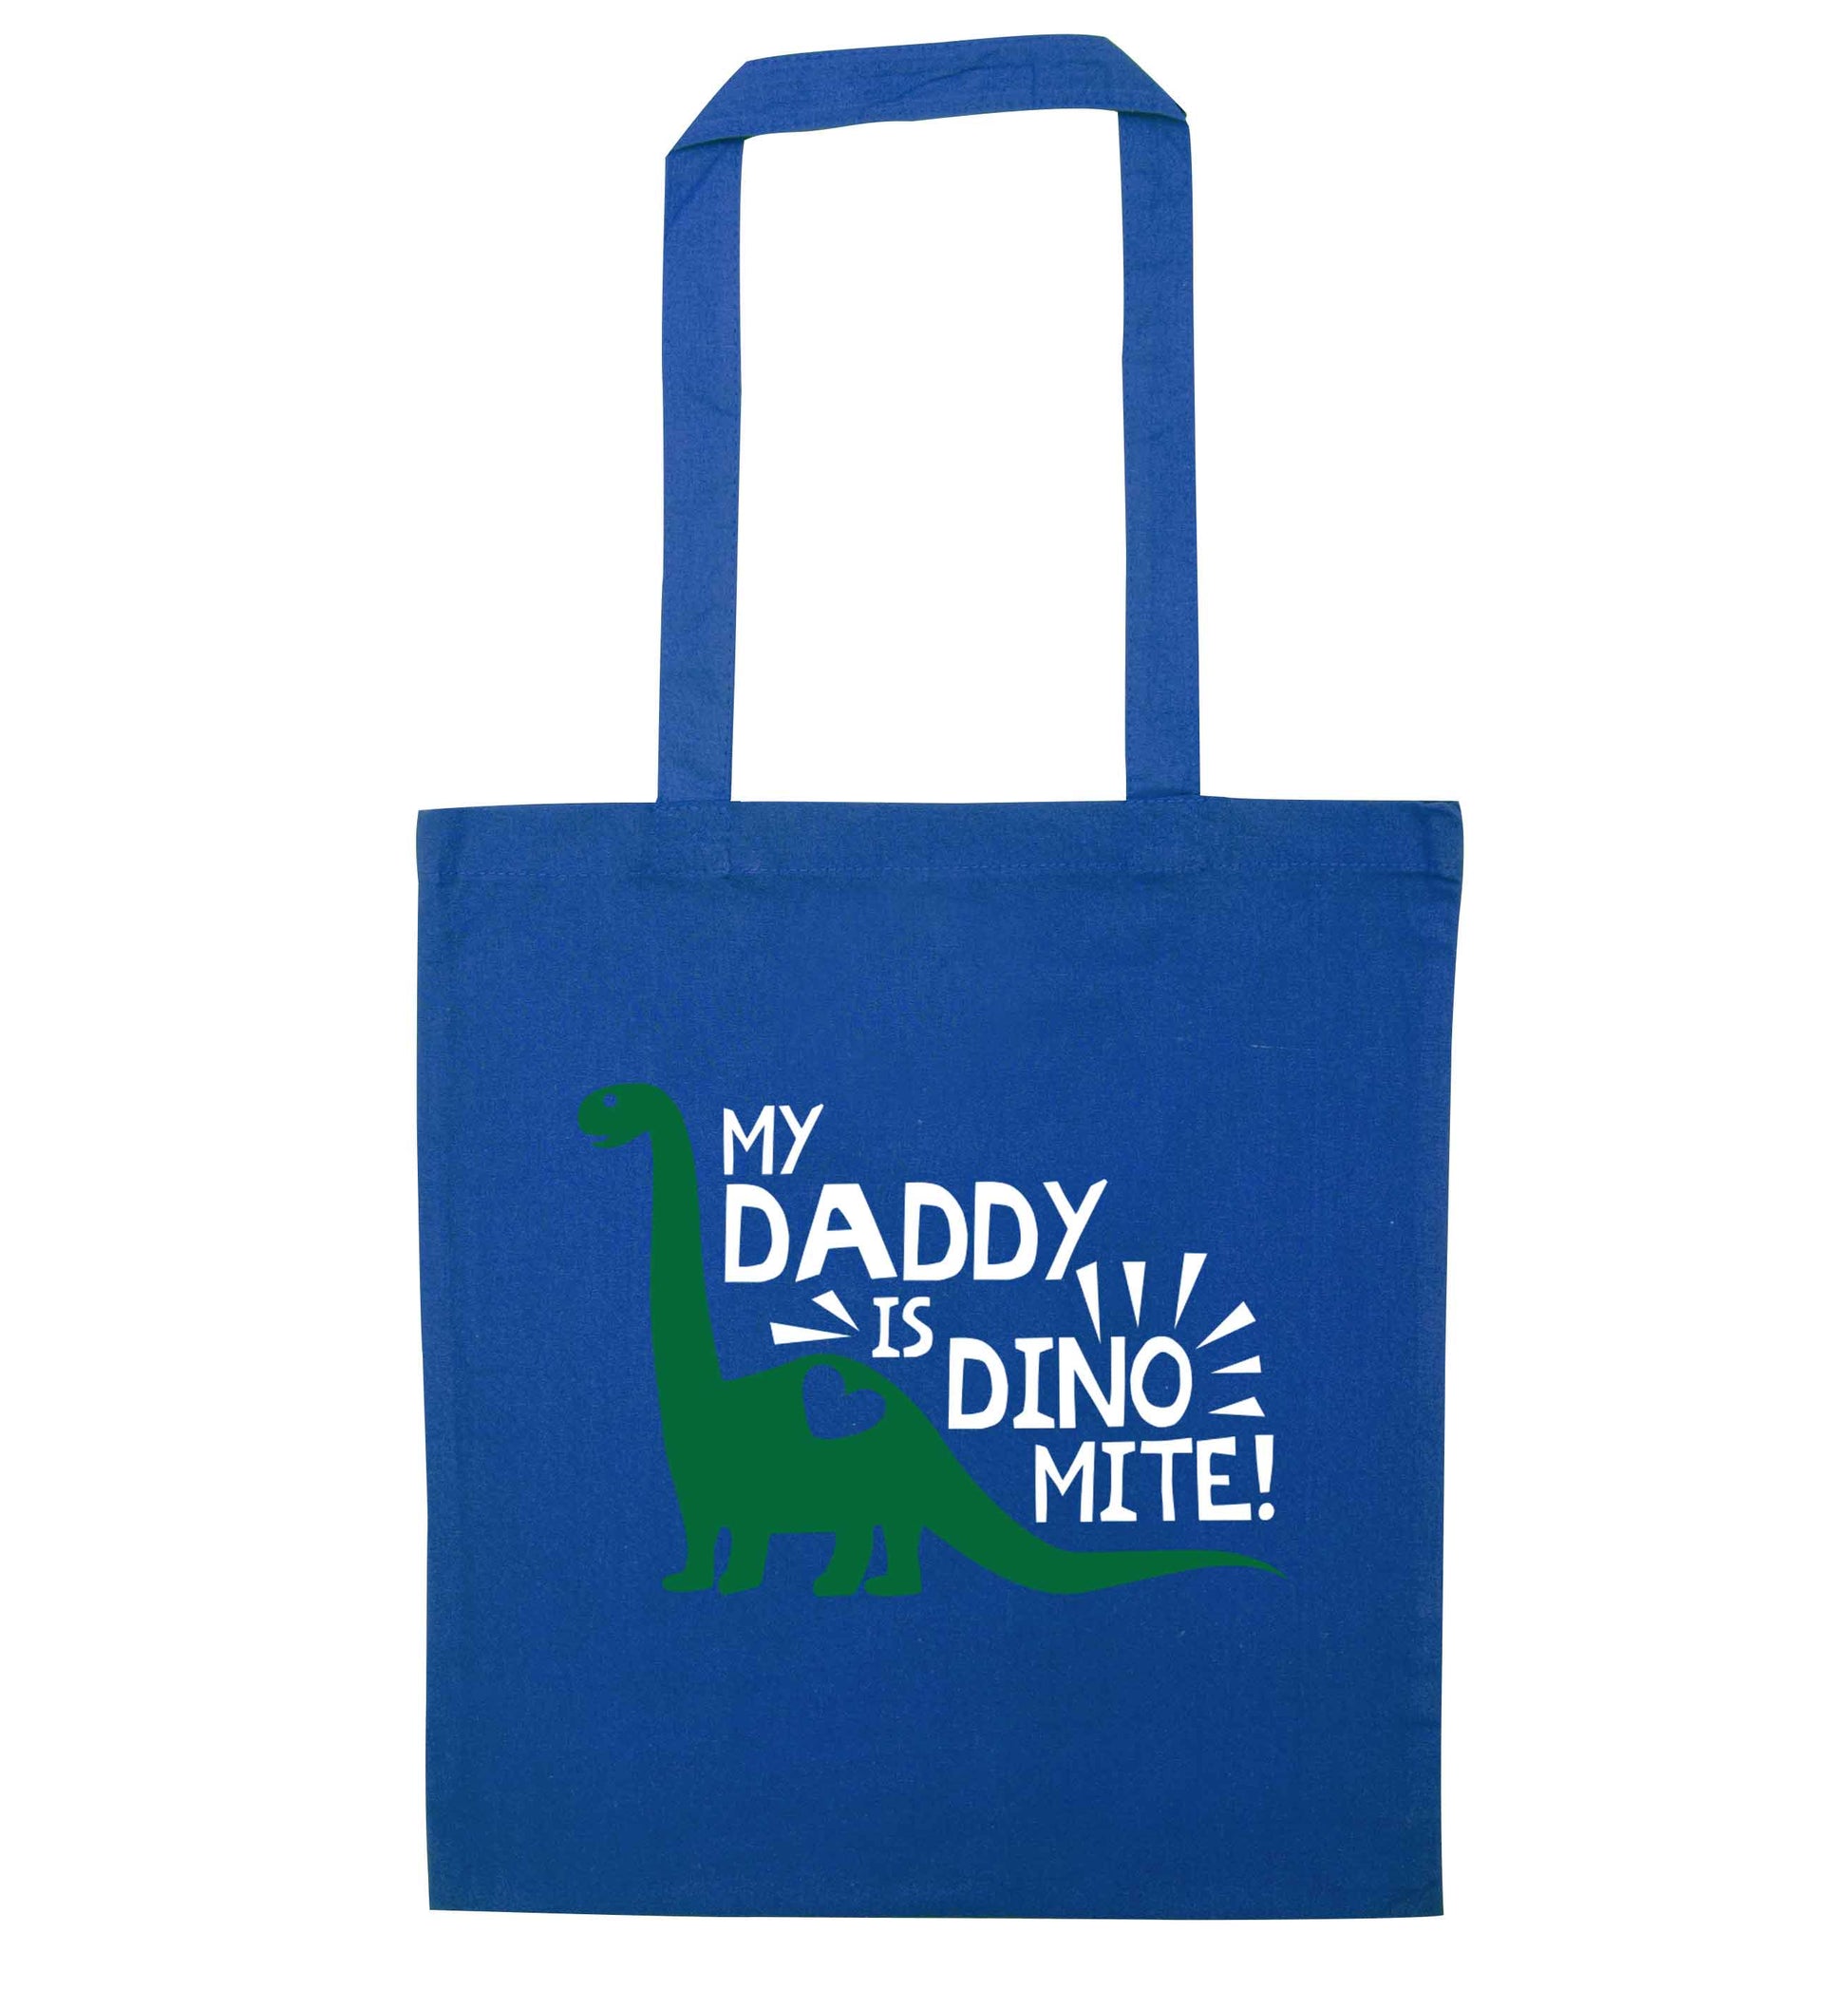 My daddy is dinomite! blue tote bag